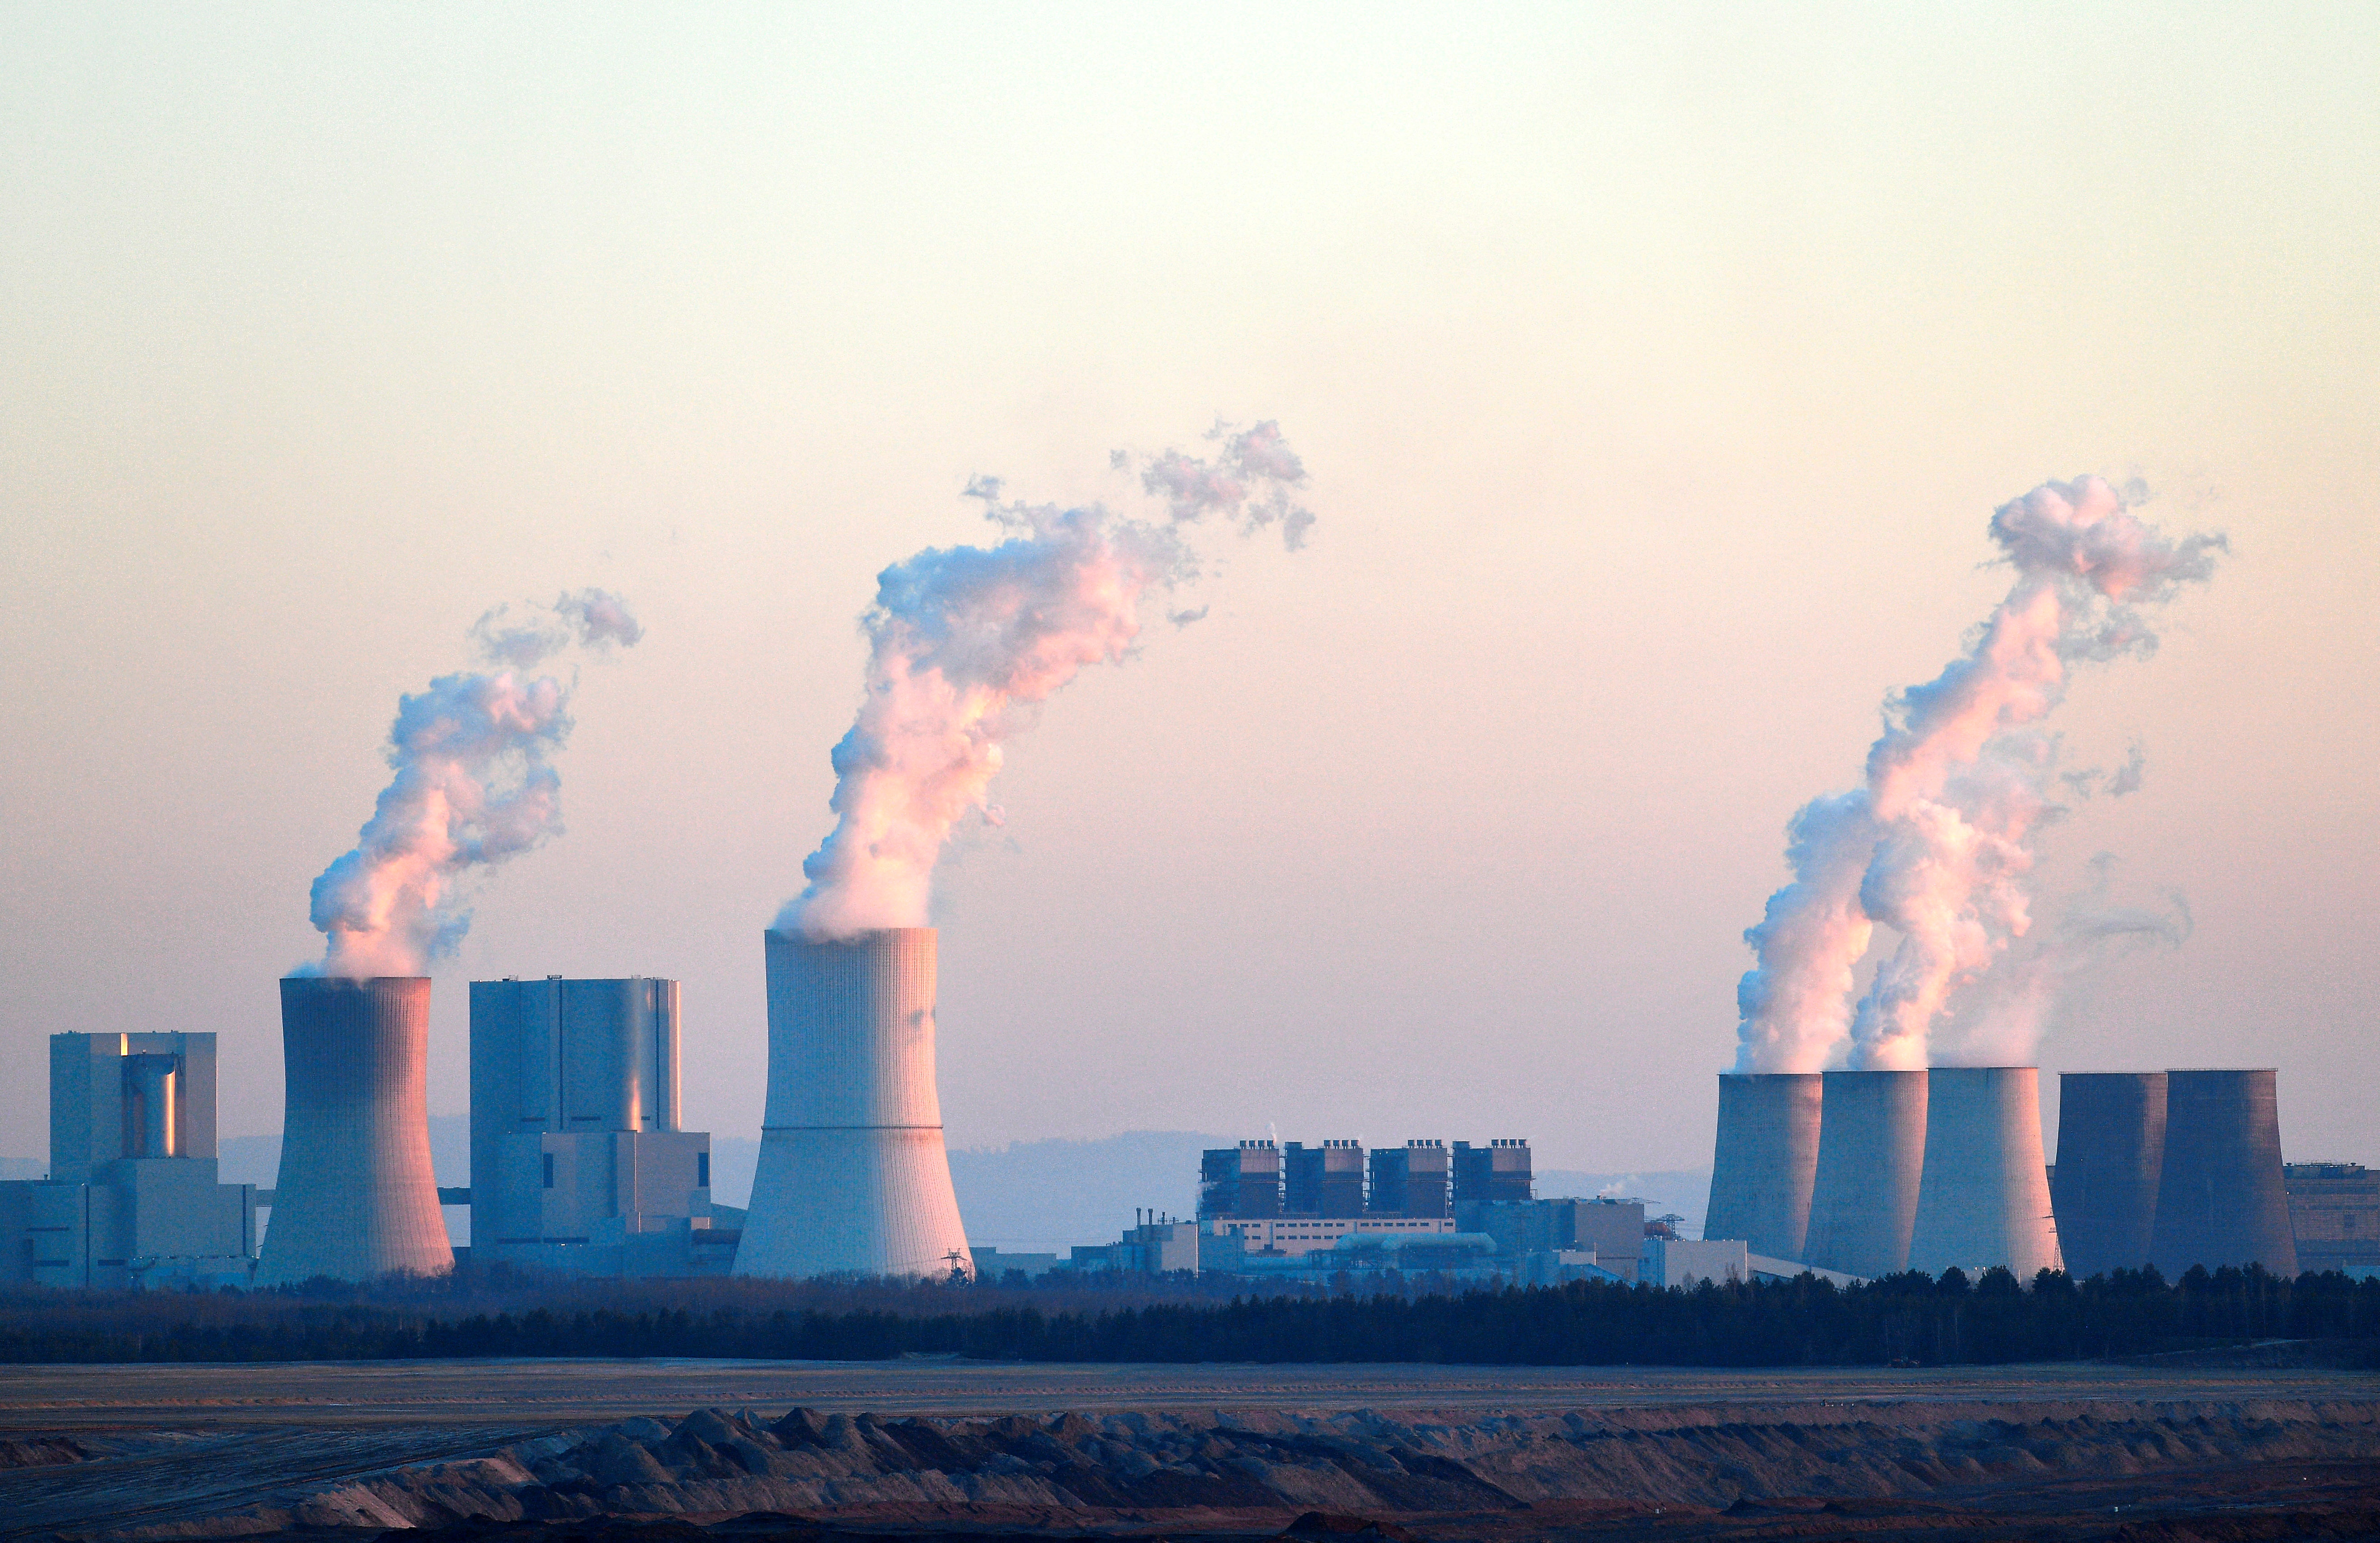 The opencast lignite mine Nochten and the coal-fired power Boxberg Power Station, operated by Lausitz Energie Bergbau AG (LEAG) company, is pictured in Nochten, Germany, March 22, 2022